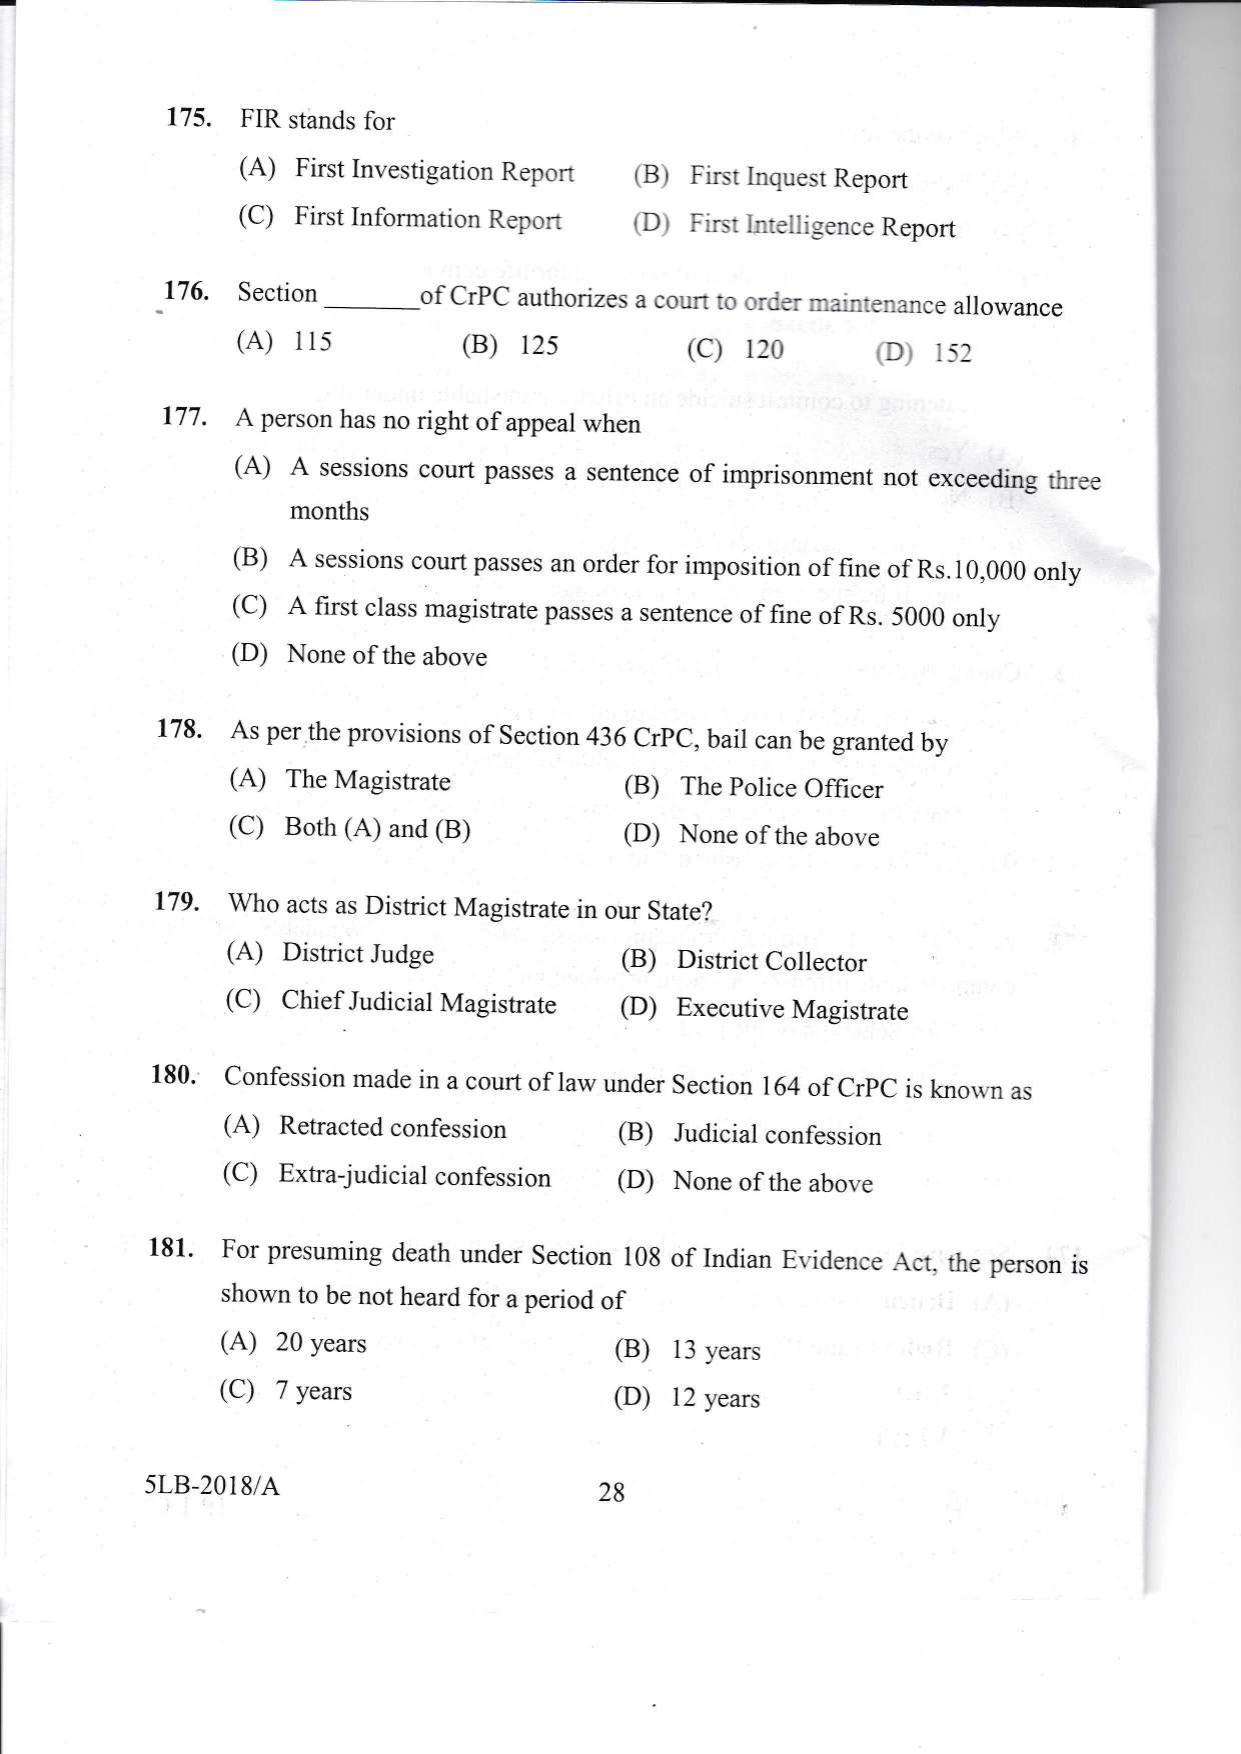 KLEE 5 Year LLB Exam 2018 Question Paper - Page 28